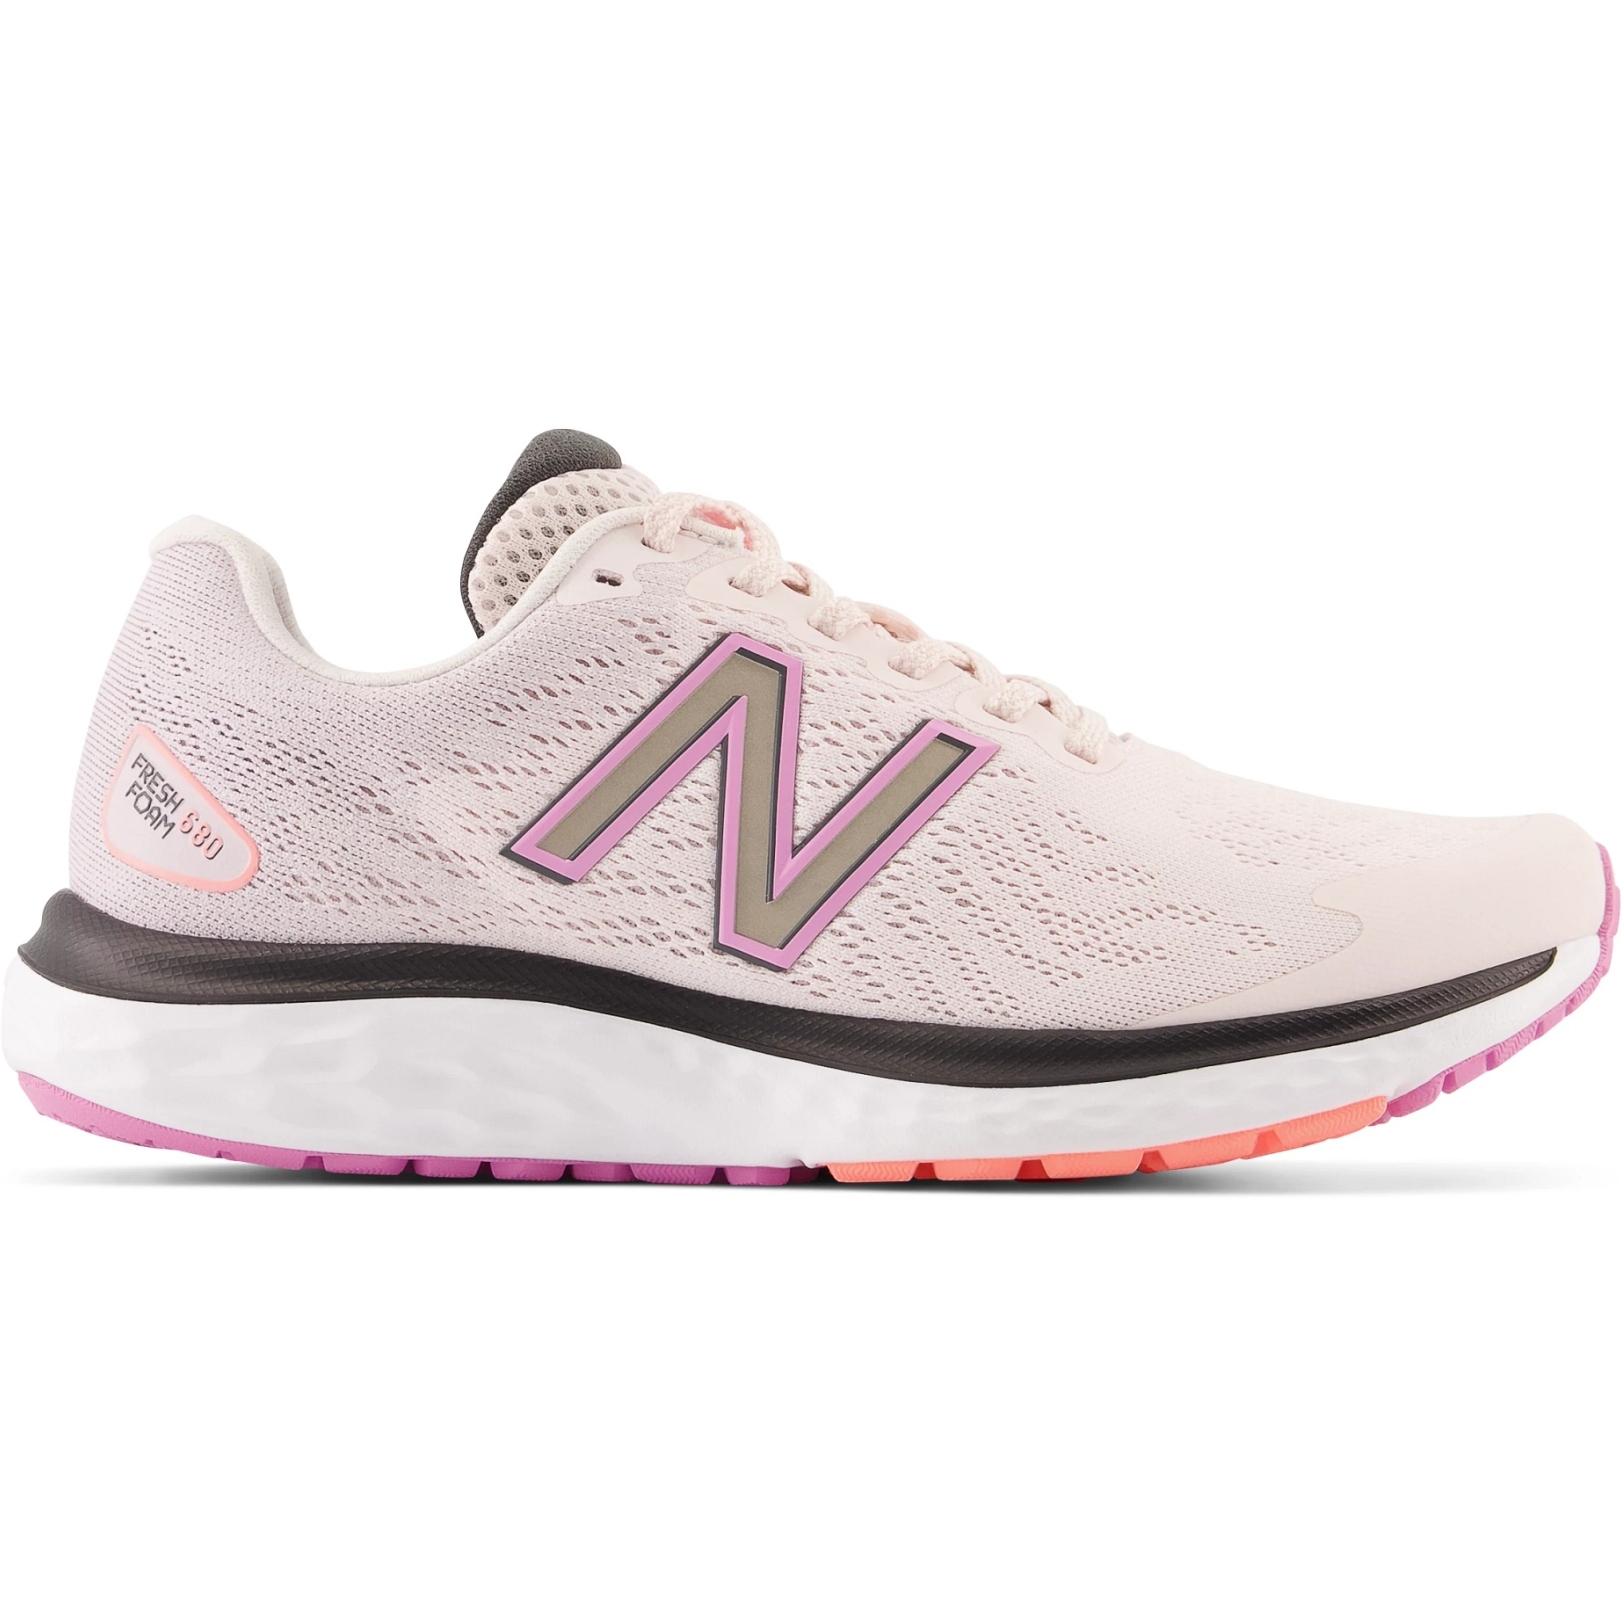 Picture of New Balance Fresh Foam 680 v7 Road Running Shoes Women - Pink